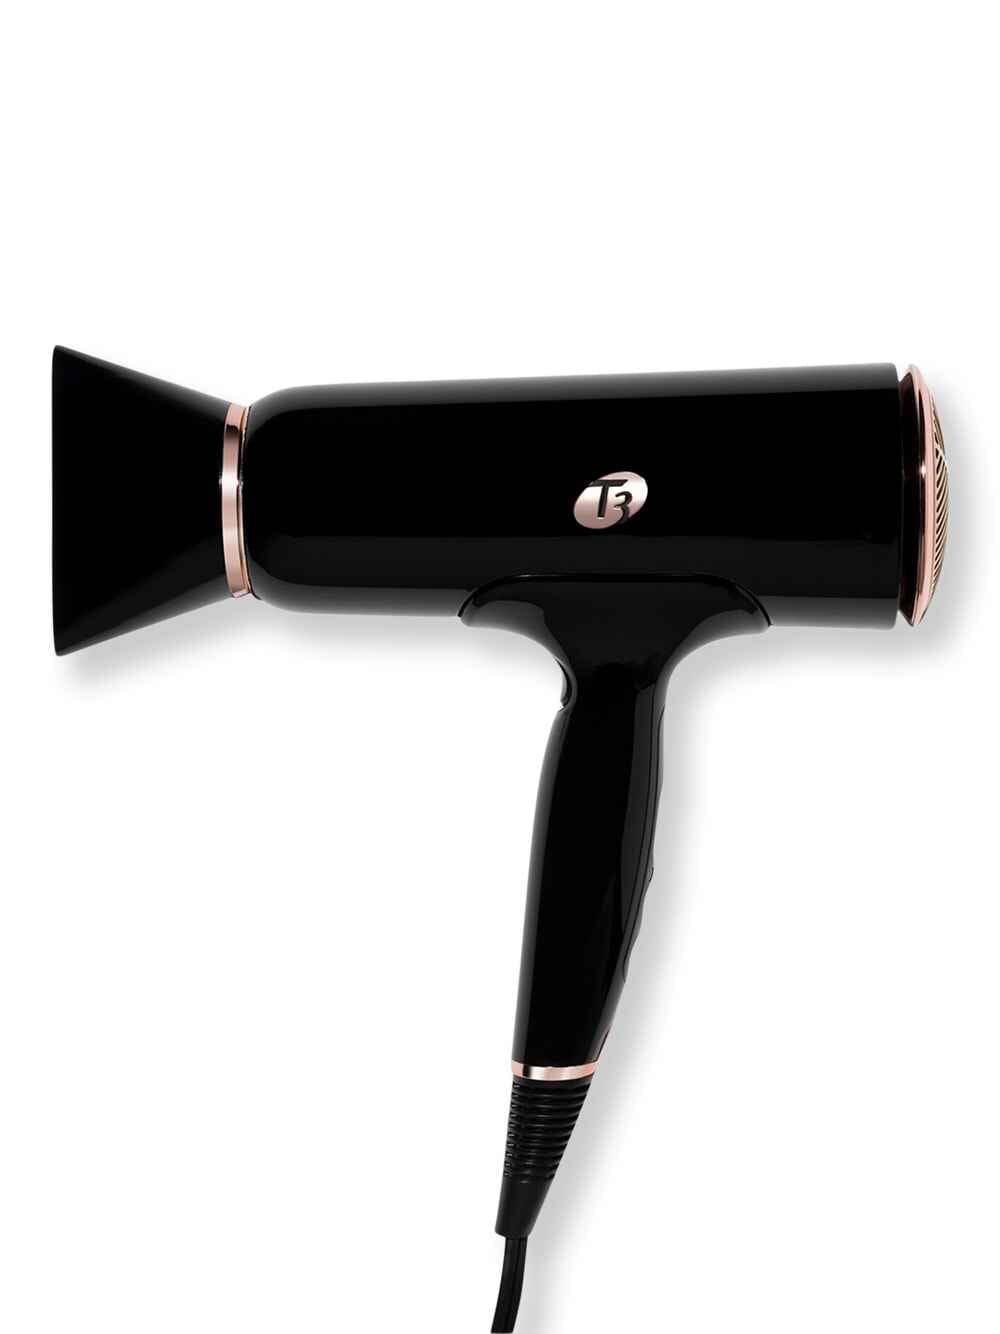 T3 Micro T3 Micro Cura Luxe Black Hair Dryers & Styling Tools 